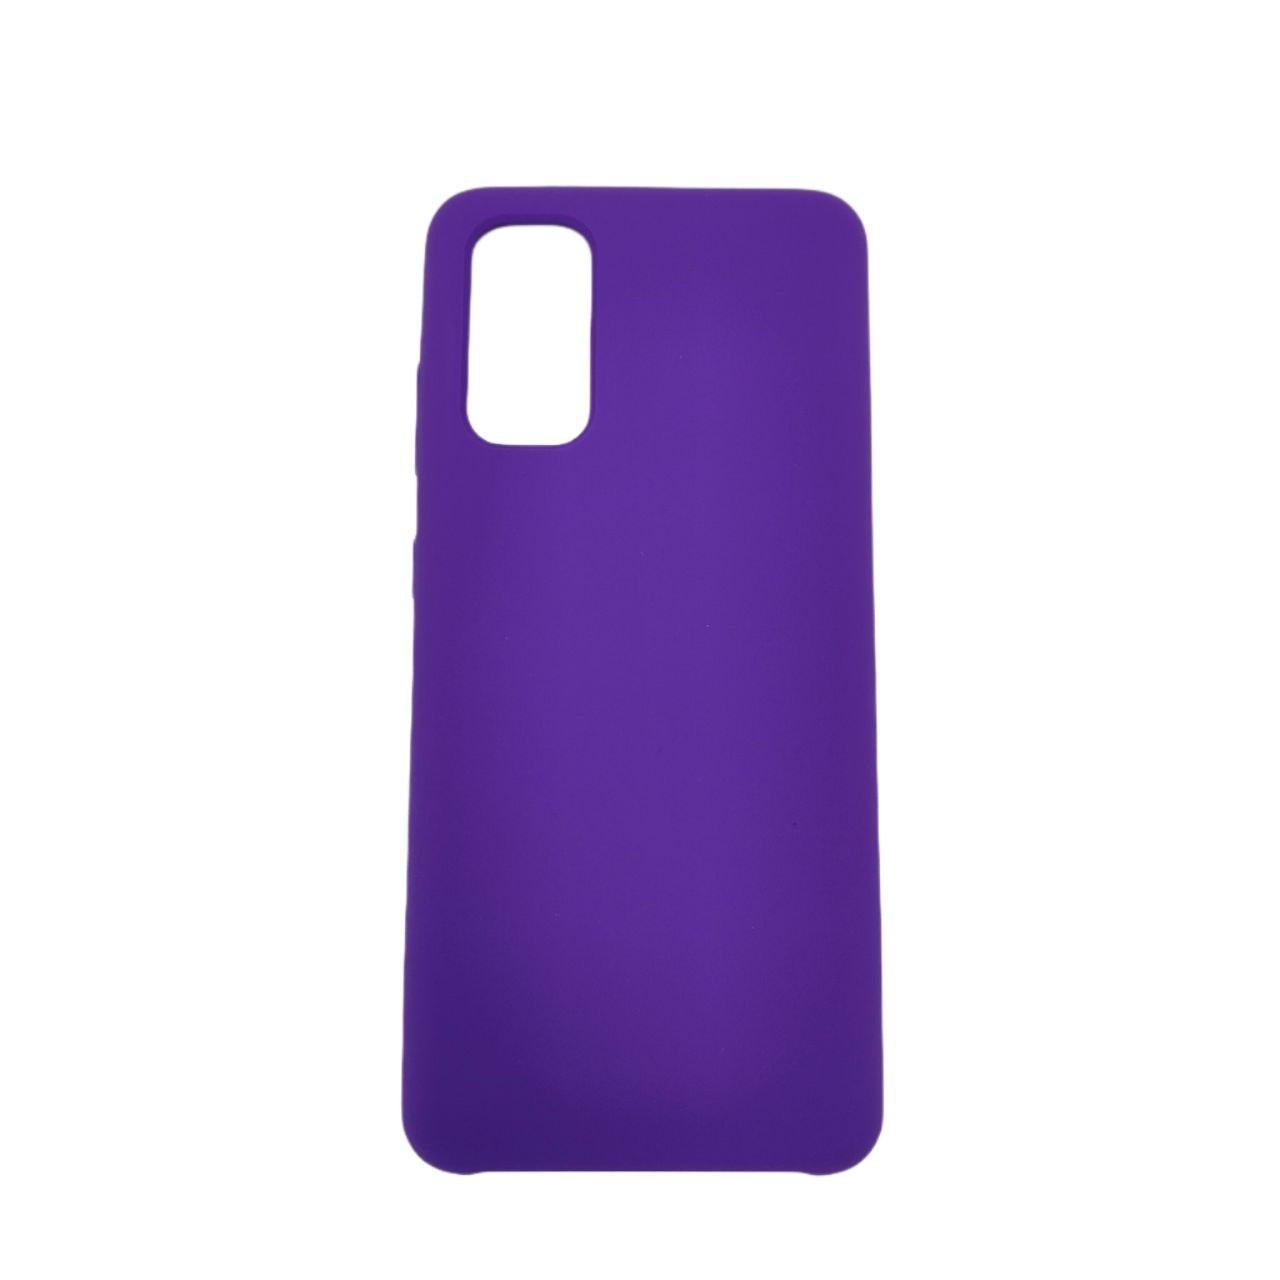 Case for Samsung S20, Silicone Gel Rubber Shock-Absorption Purple - Massive Discounts